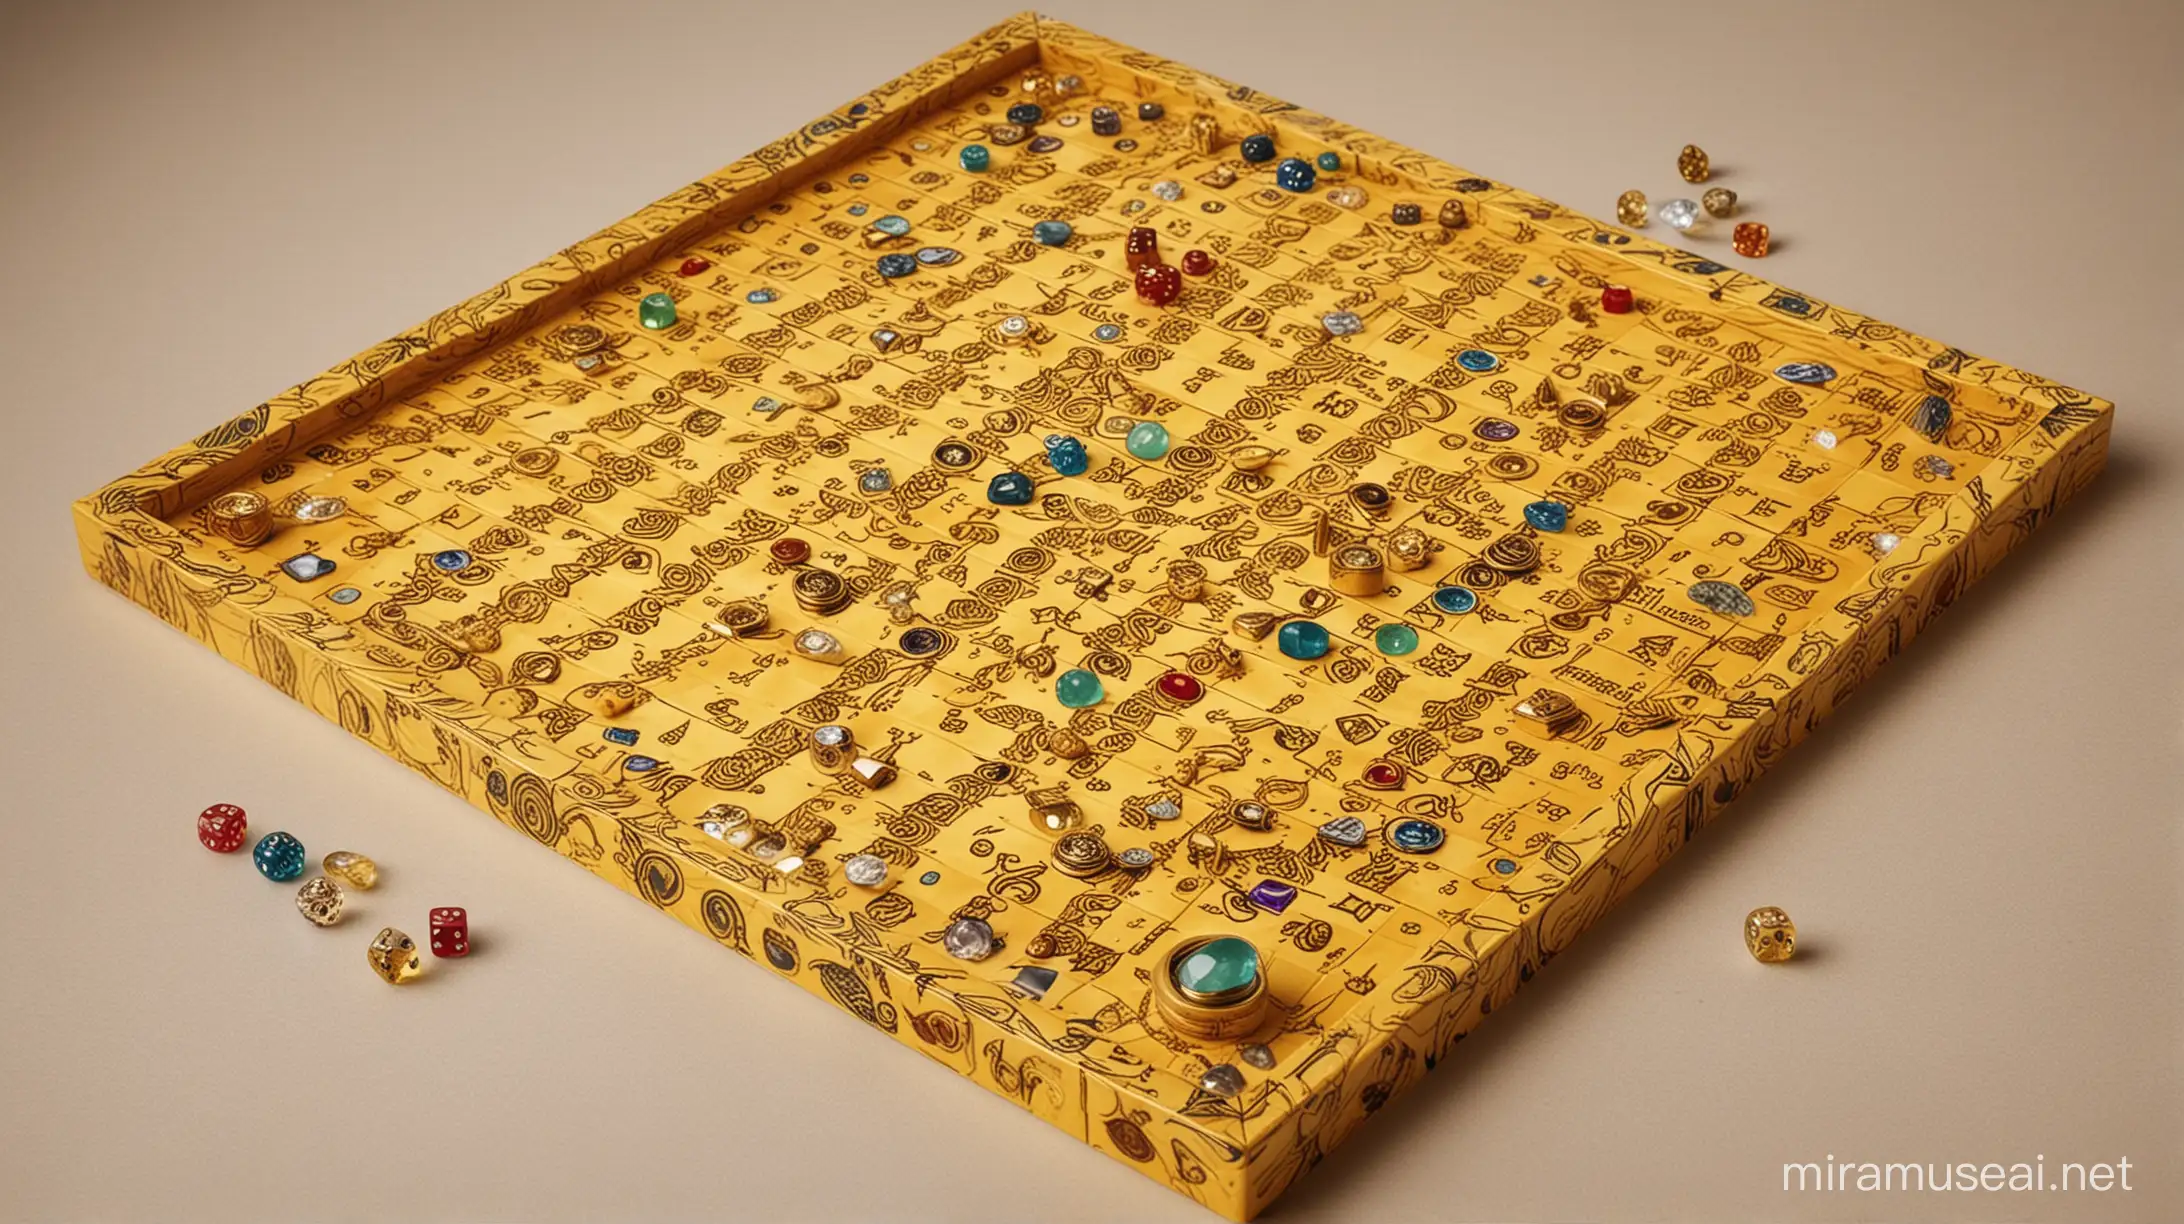 a mystical snake and ladder board game. where ladders are made of gold and snakes are made of diamonds and the dices are made of both diamonds and gold and a big gemstone is place in the centre of the board game in yellow colour